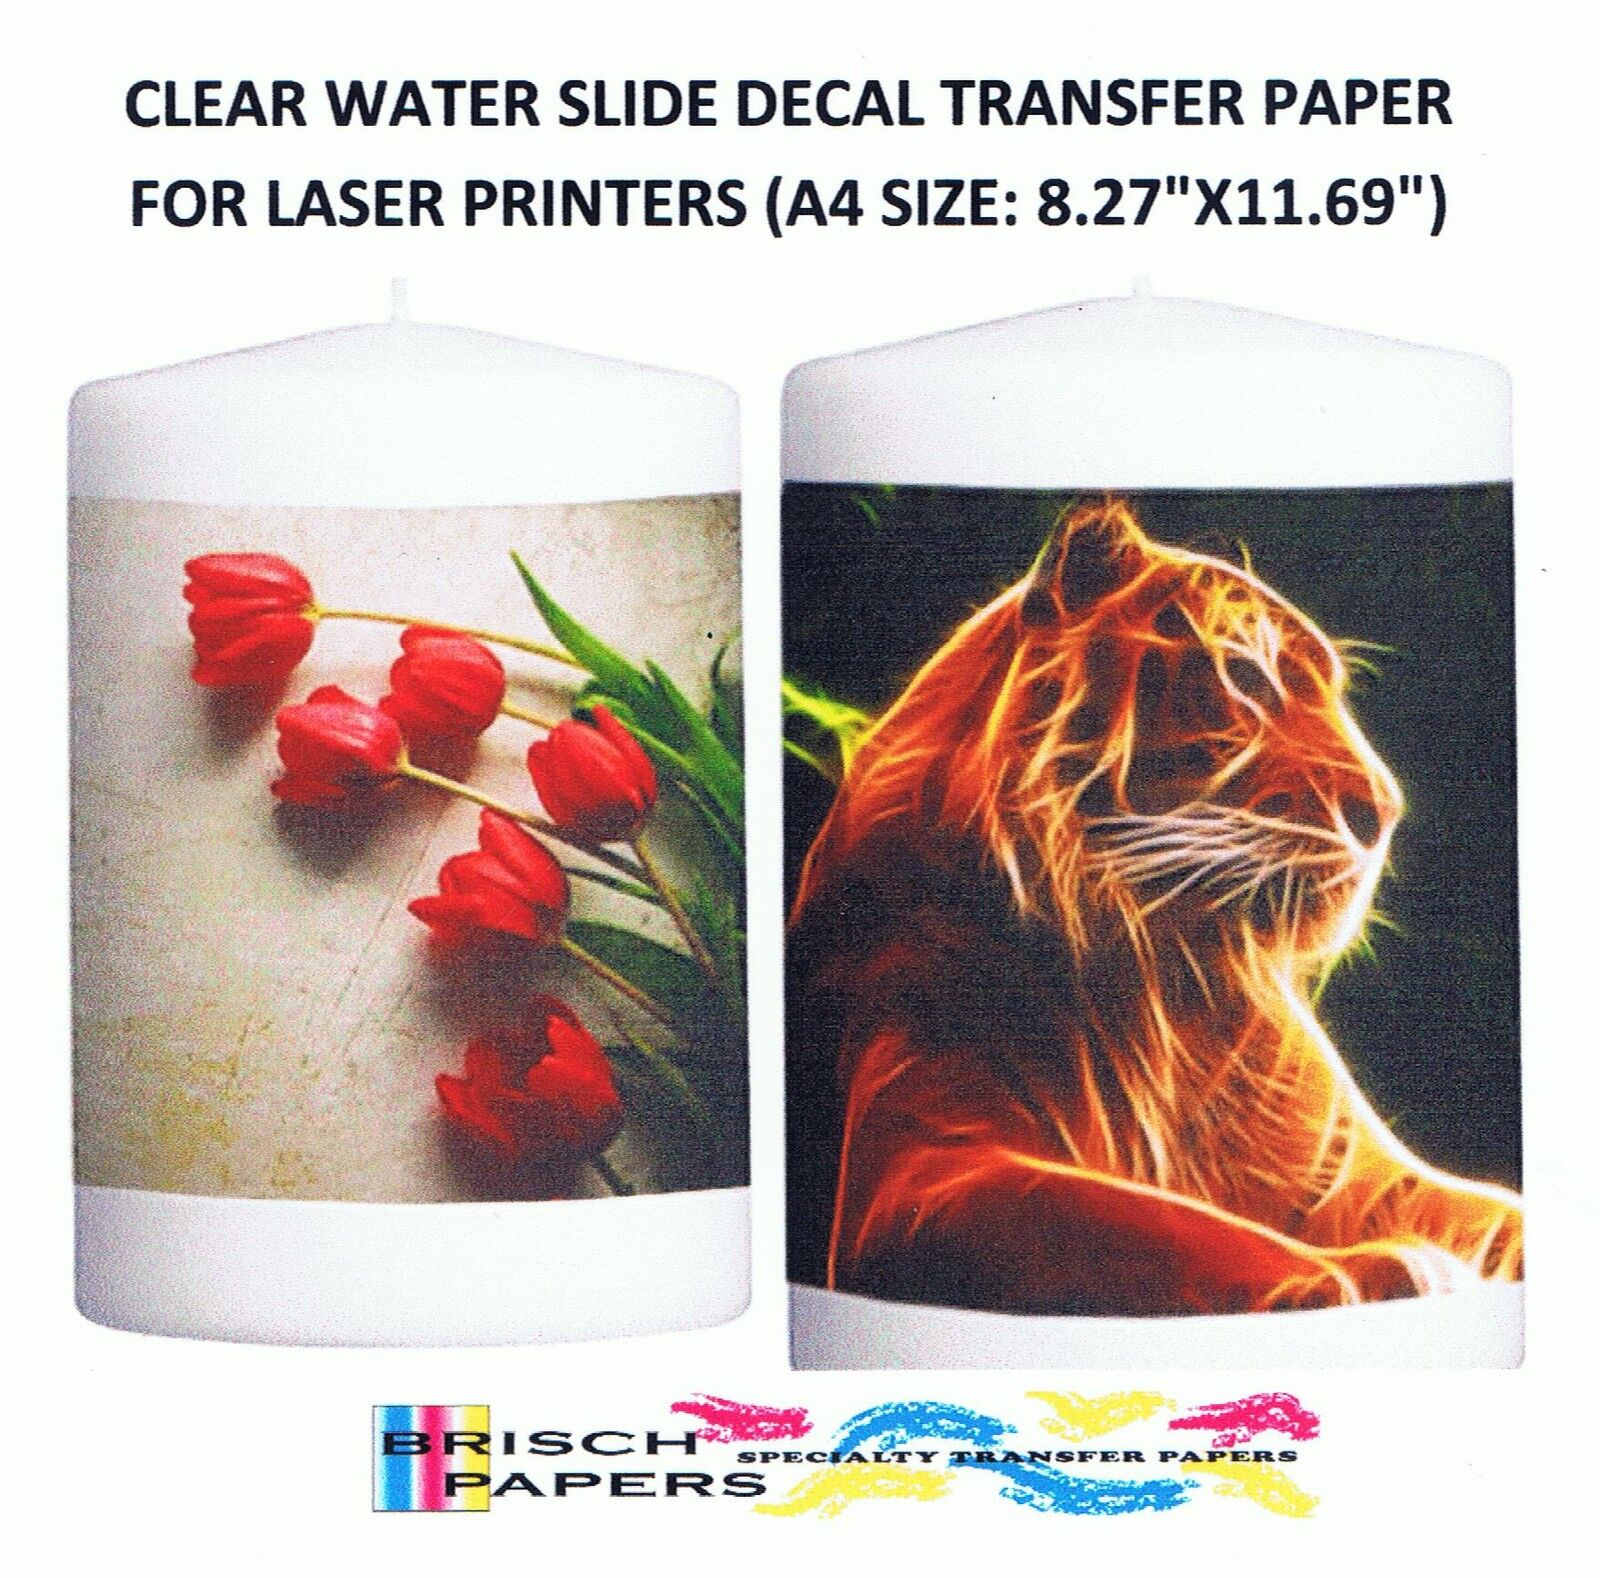 CLEAR WATER SLIDE DECAL TRANSFER Large special price !! PAPER LASER FOR S Alternative dealer 100 PRINTERS: